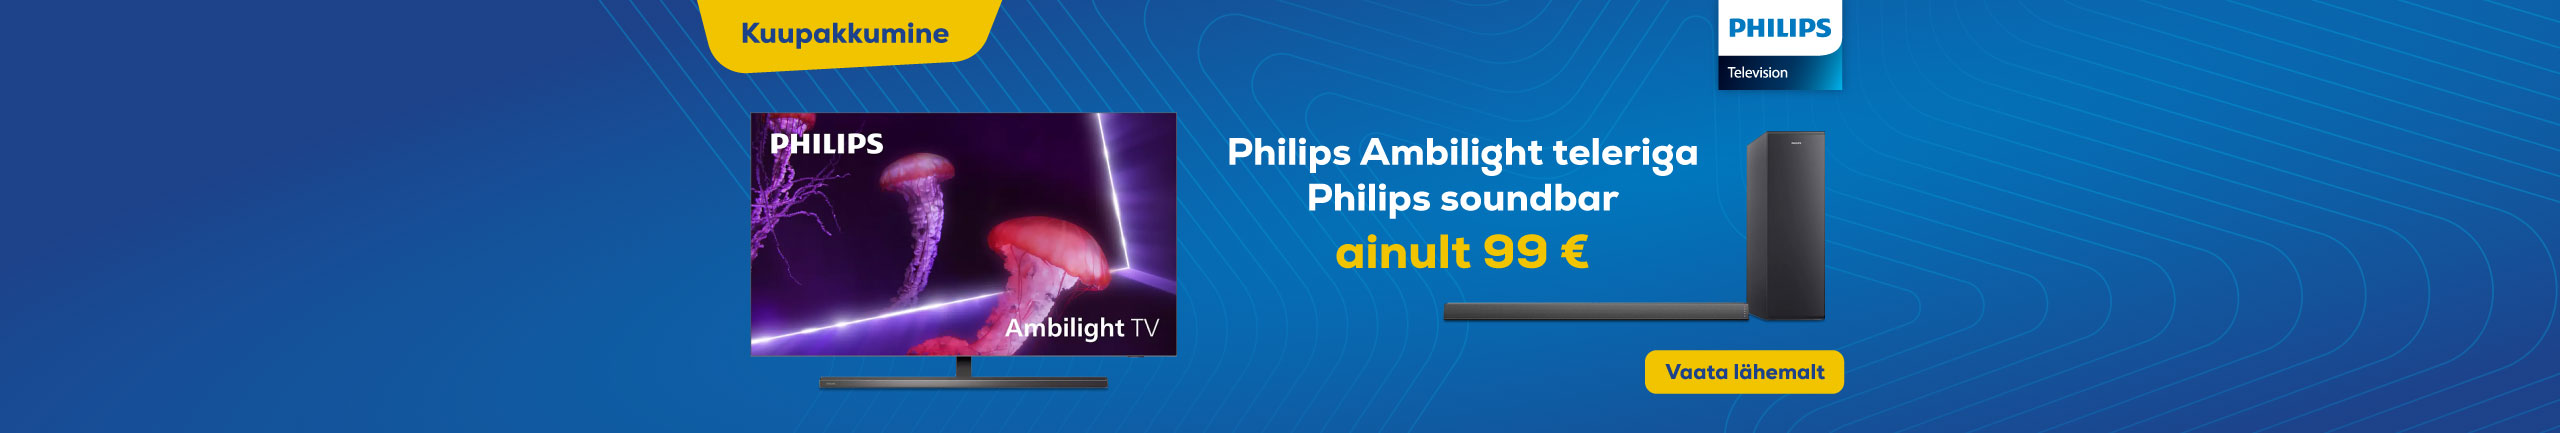 Buy Philips Ambilight TV and get a Philips soundbar for 99€